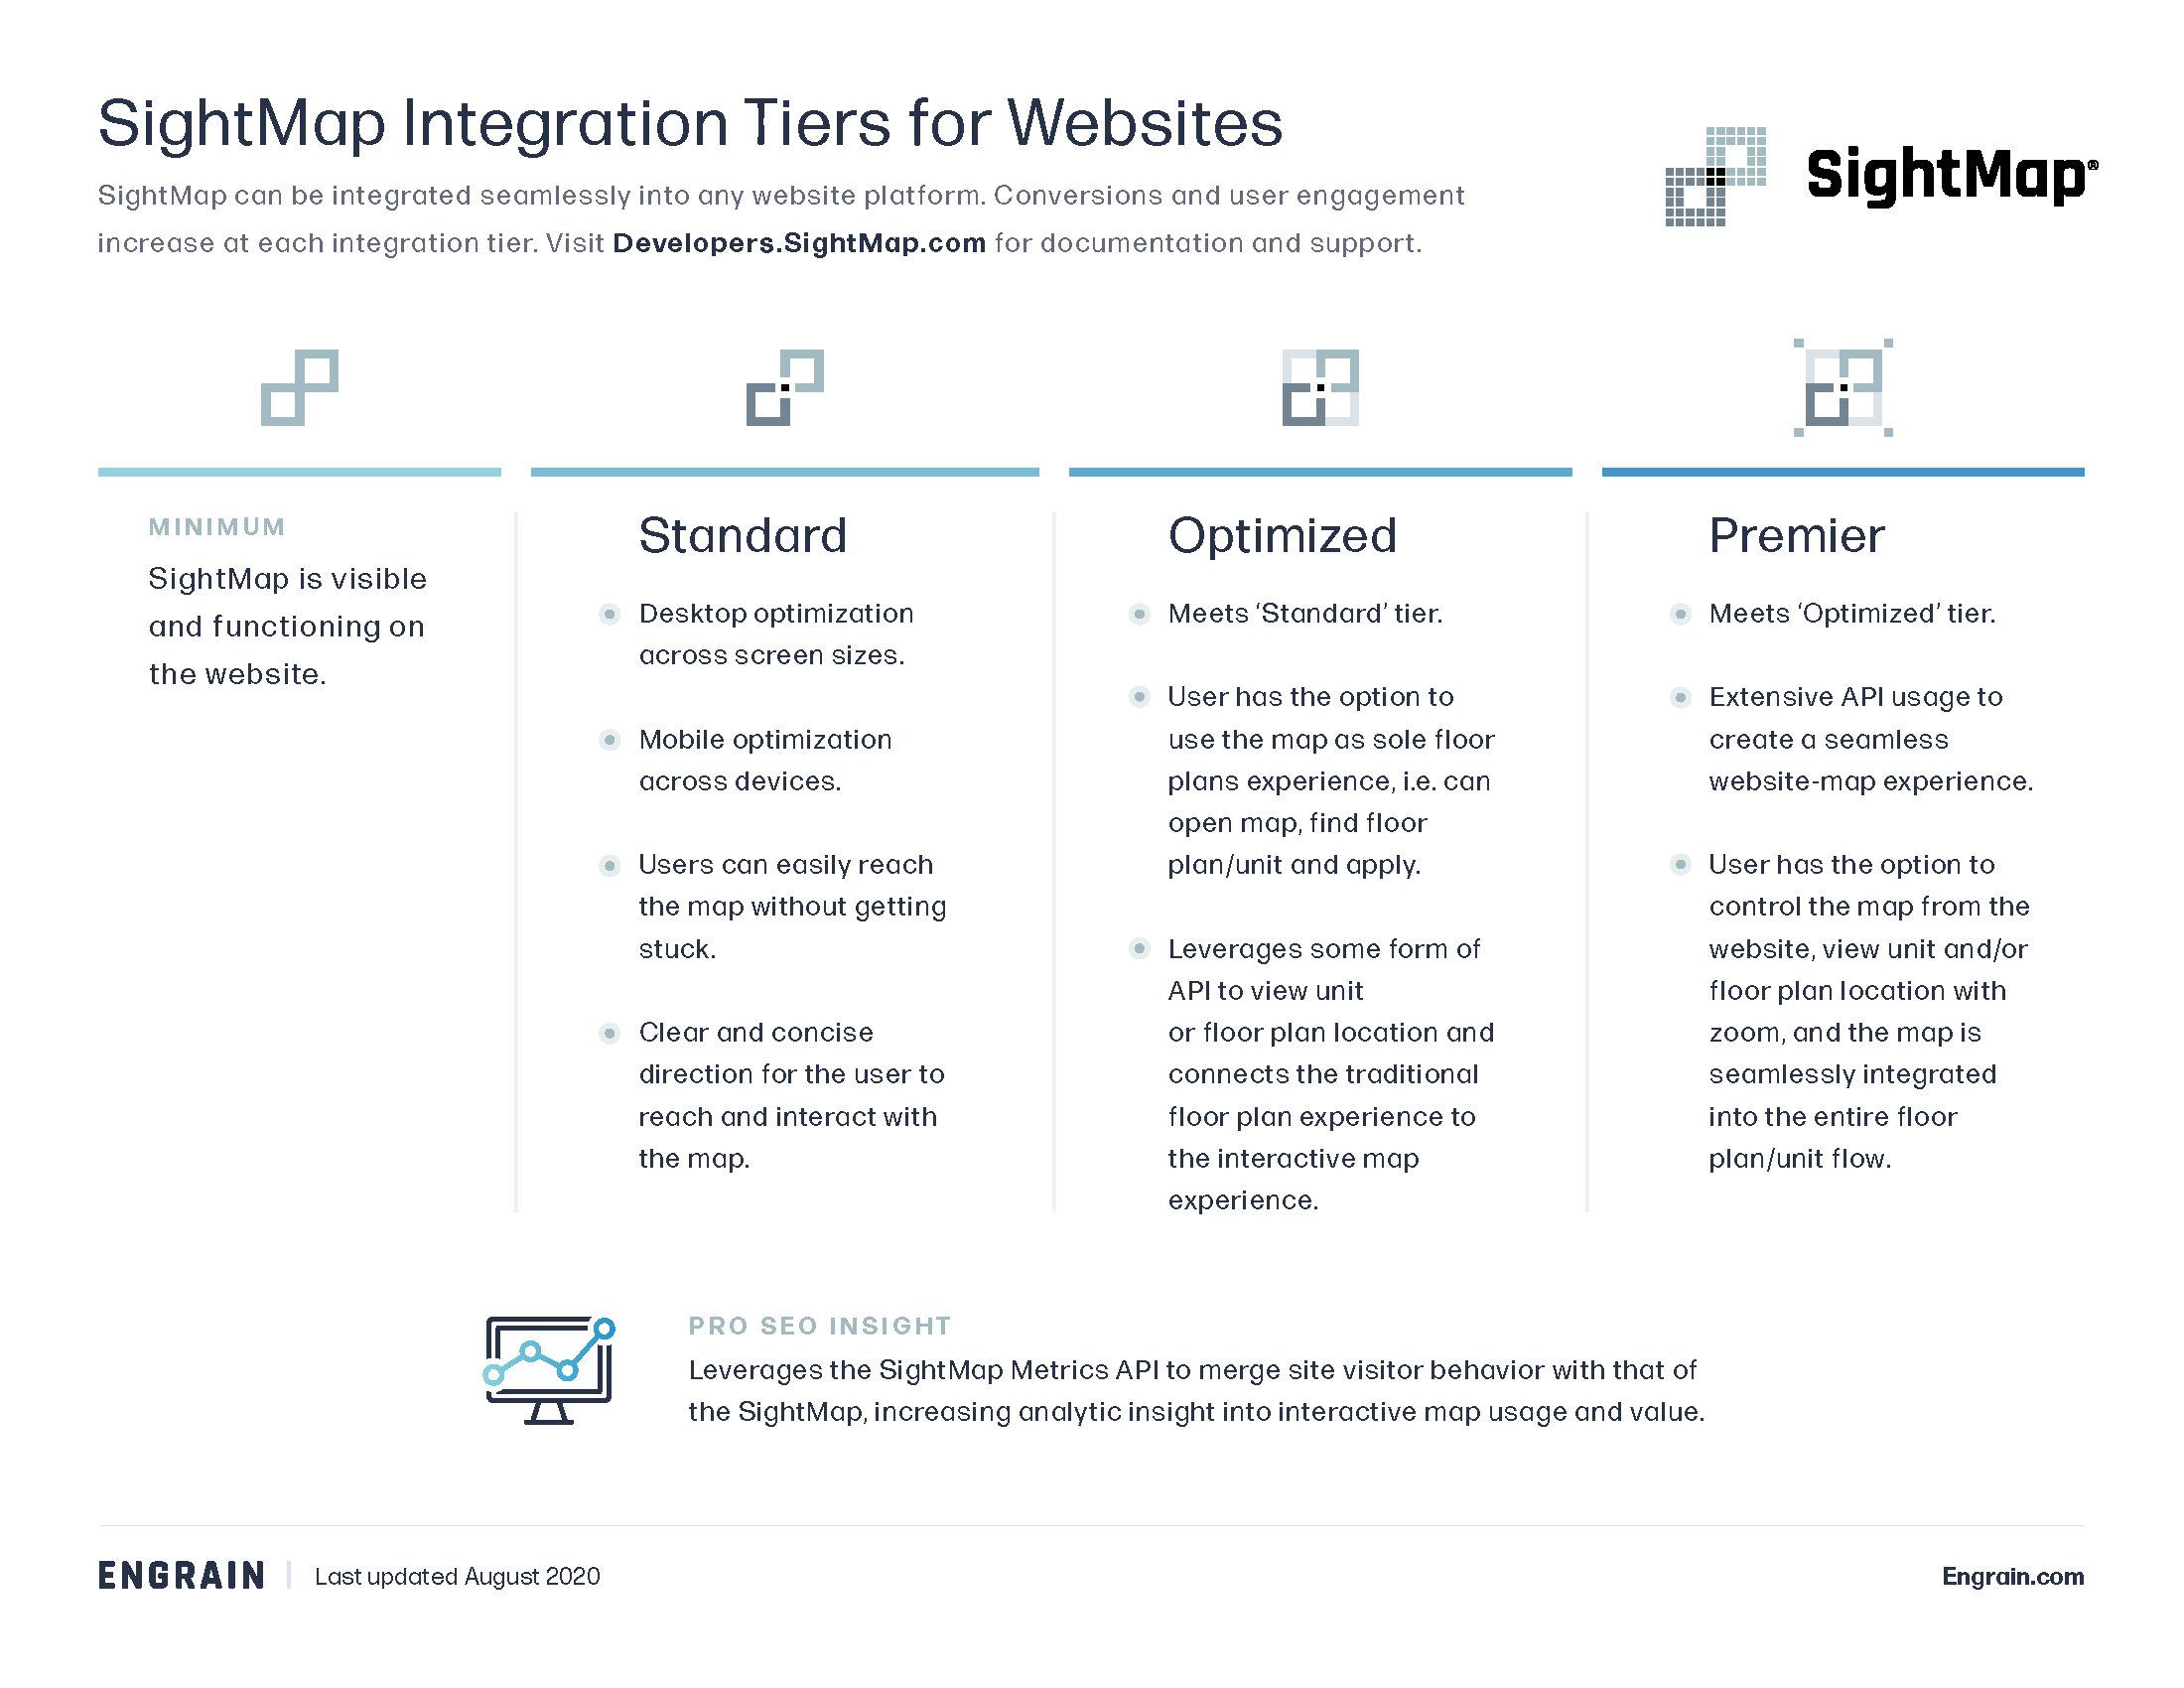 One-sheet version of the Integration Tiers specifics available for download.
[Click to download the guide](https://engrain.com/wp-content/uploads/2022/02/SightMap_Integration-Tiers-for-Websites.pdf).